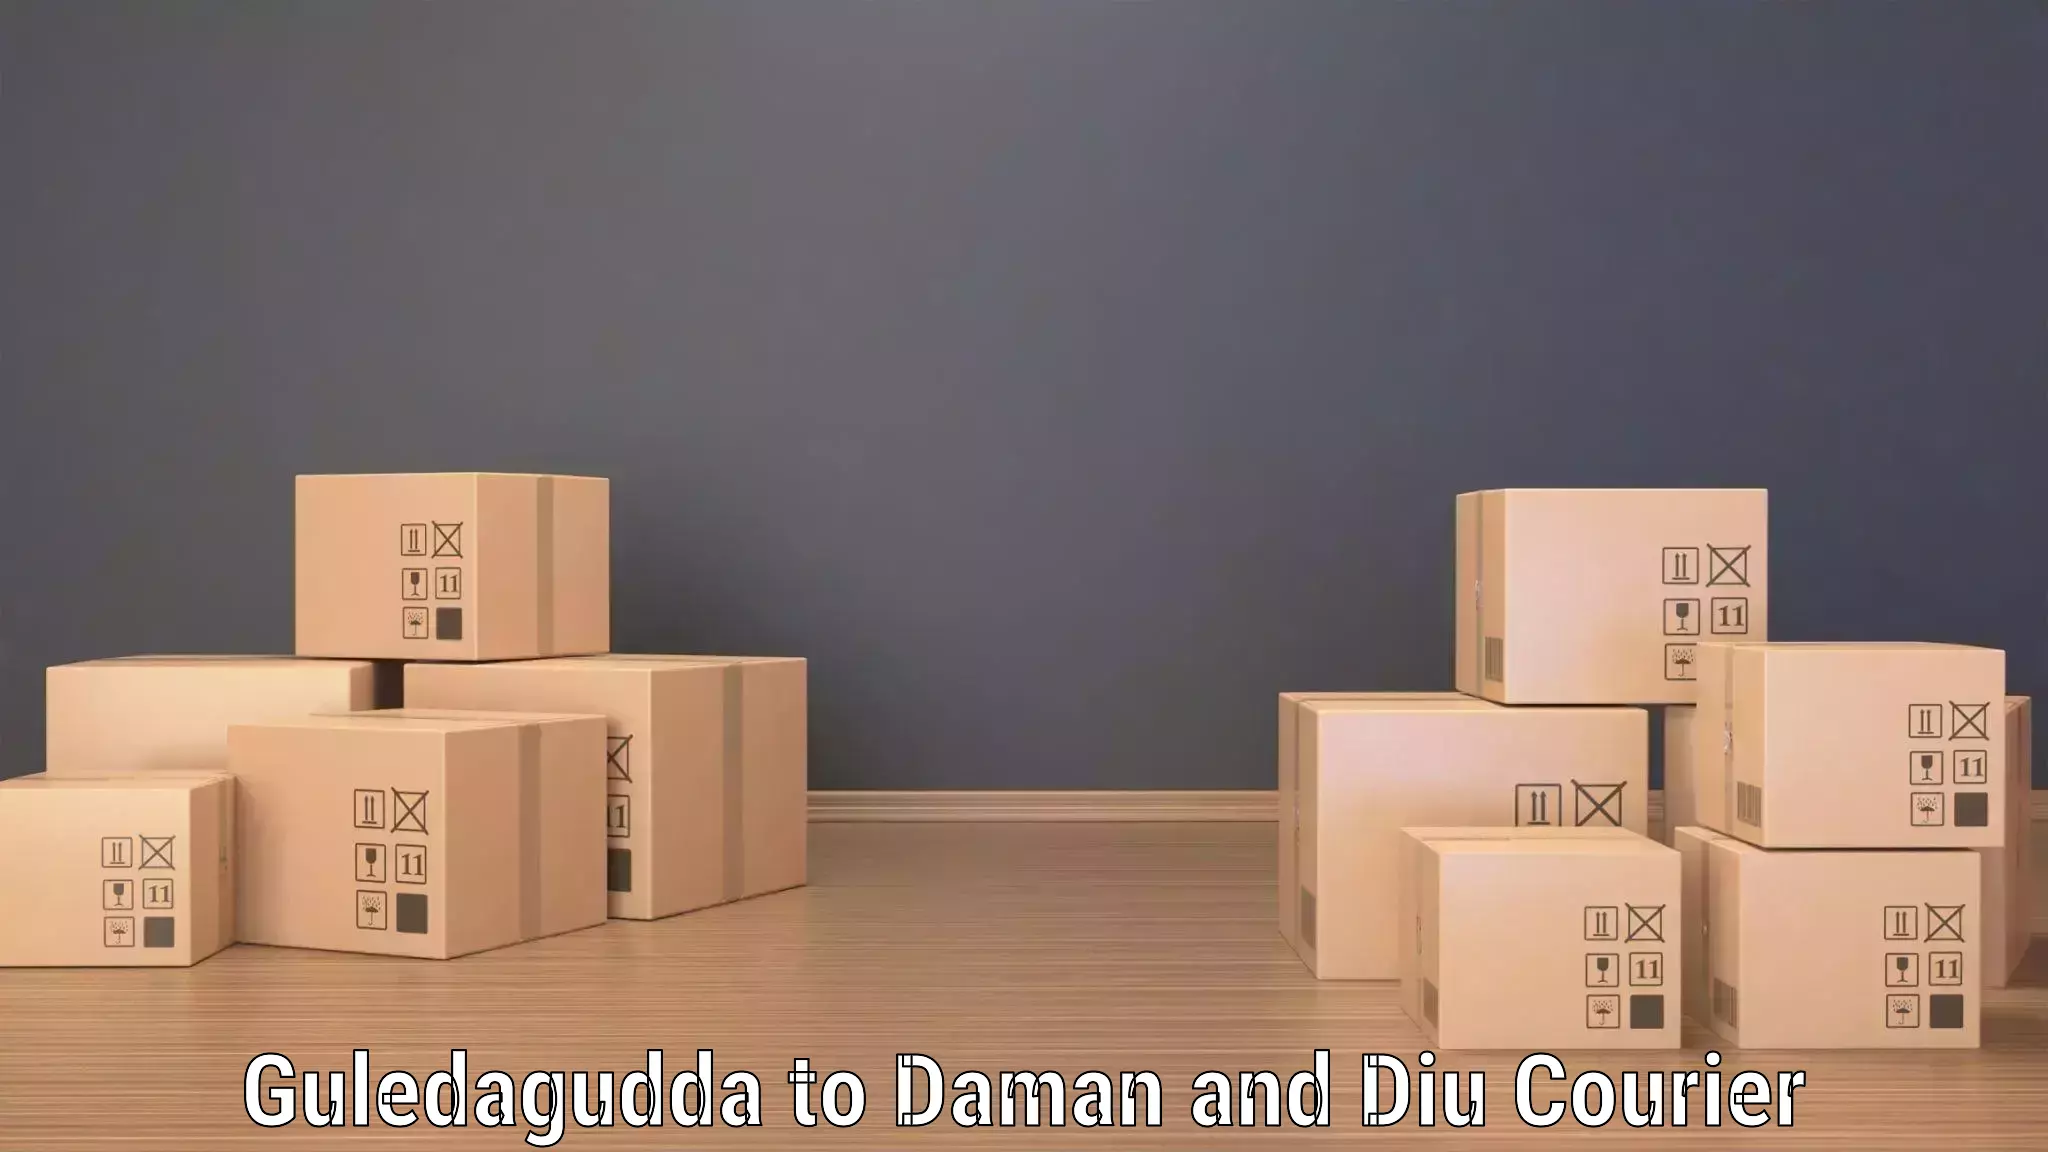 Reliable delivery network Guledagudda to Daman